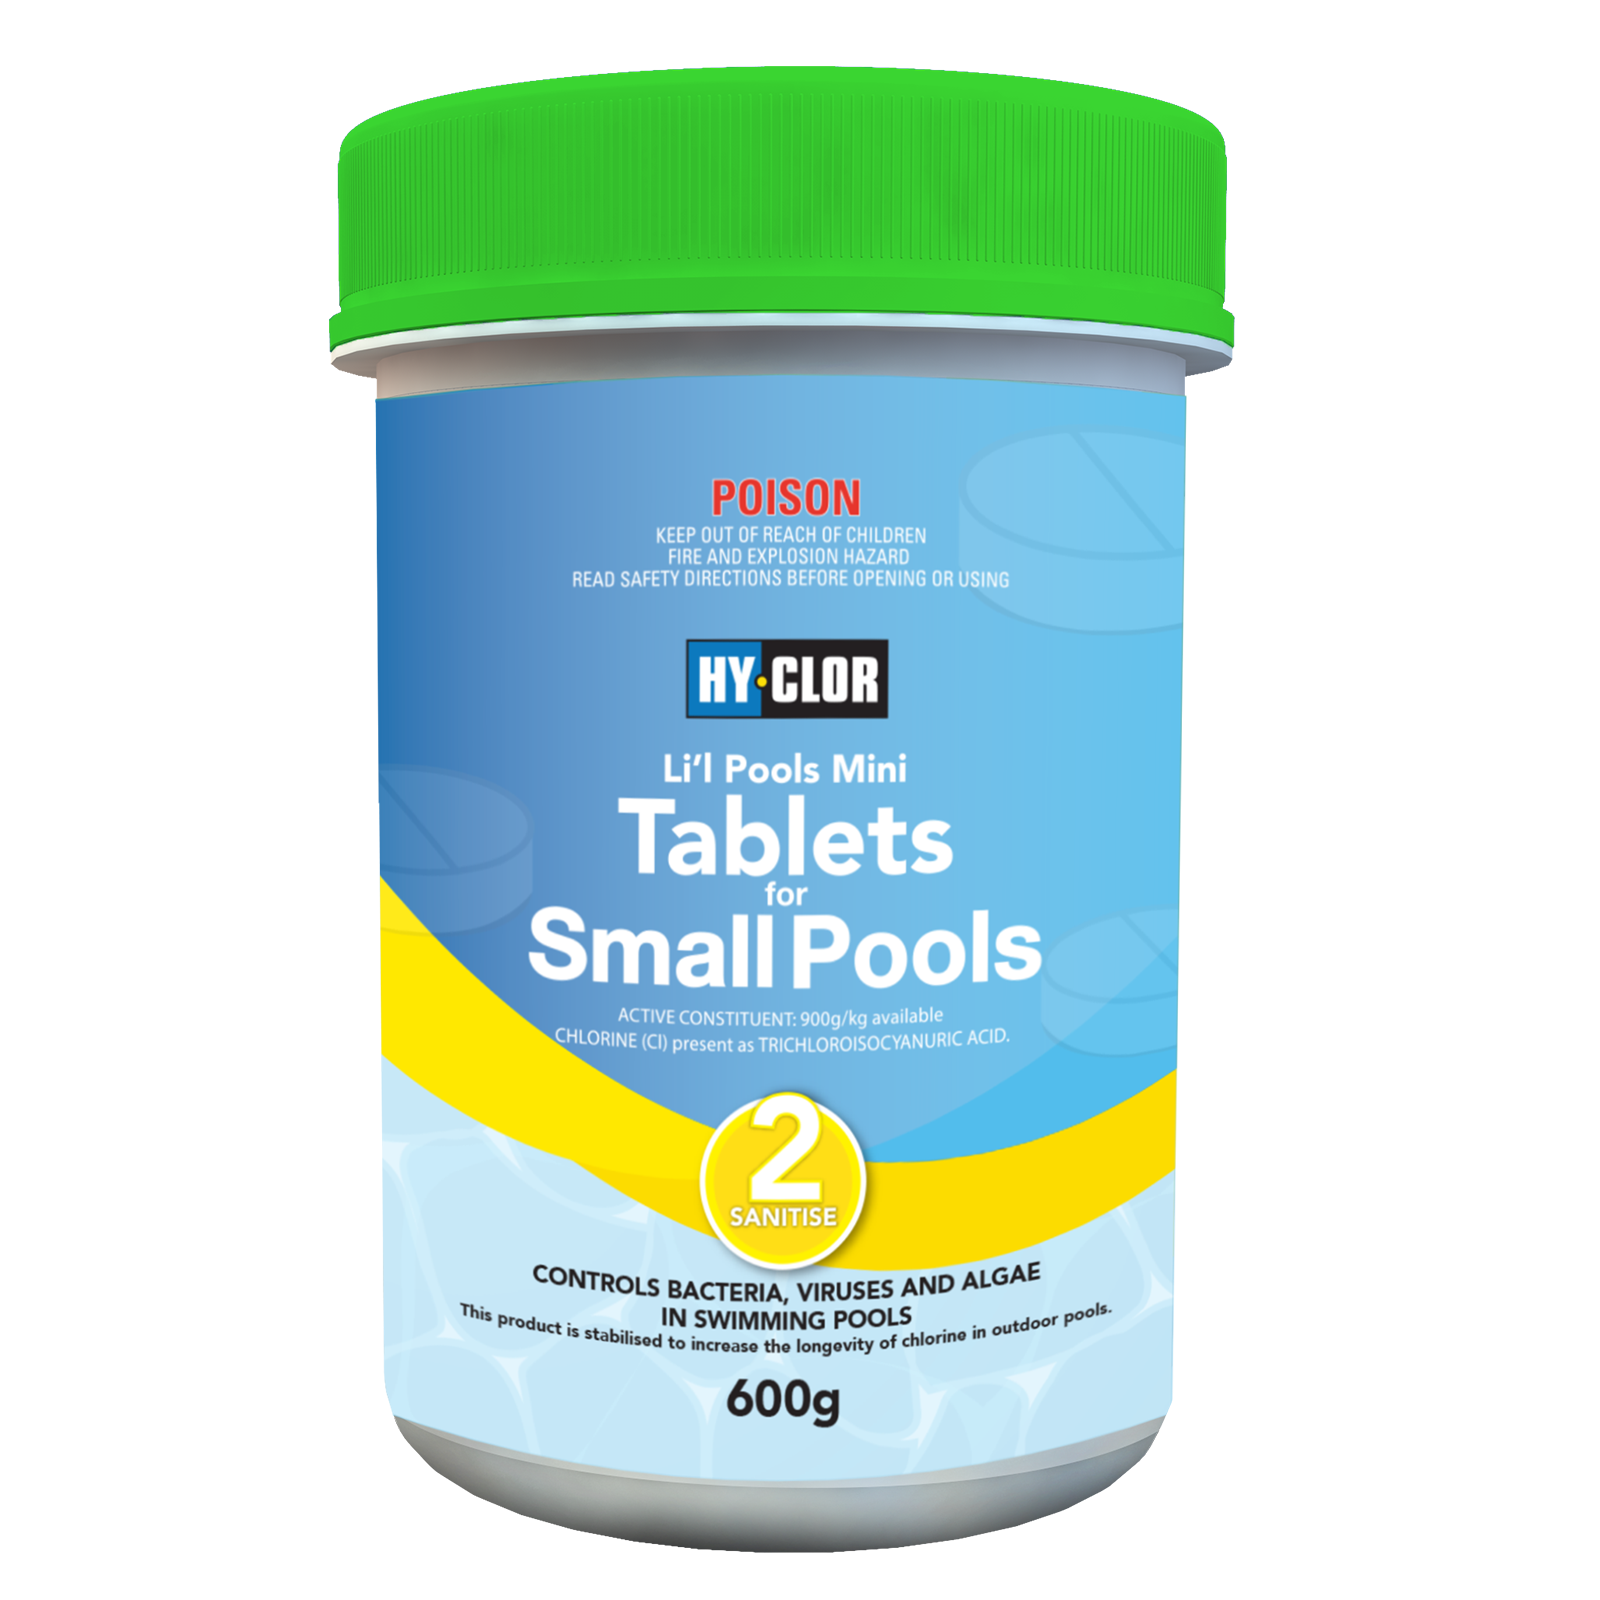 HY-CLOR MINI TABLETS FOR SMALL POOLS